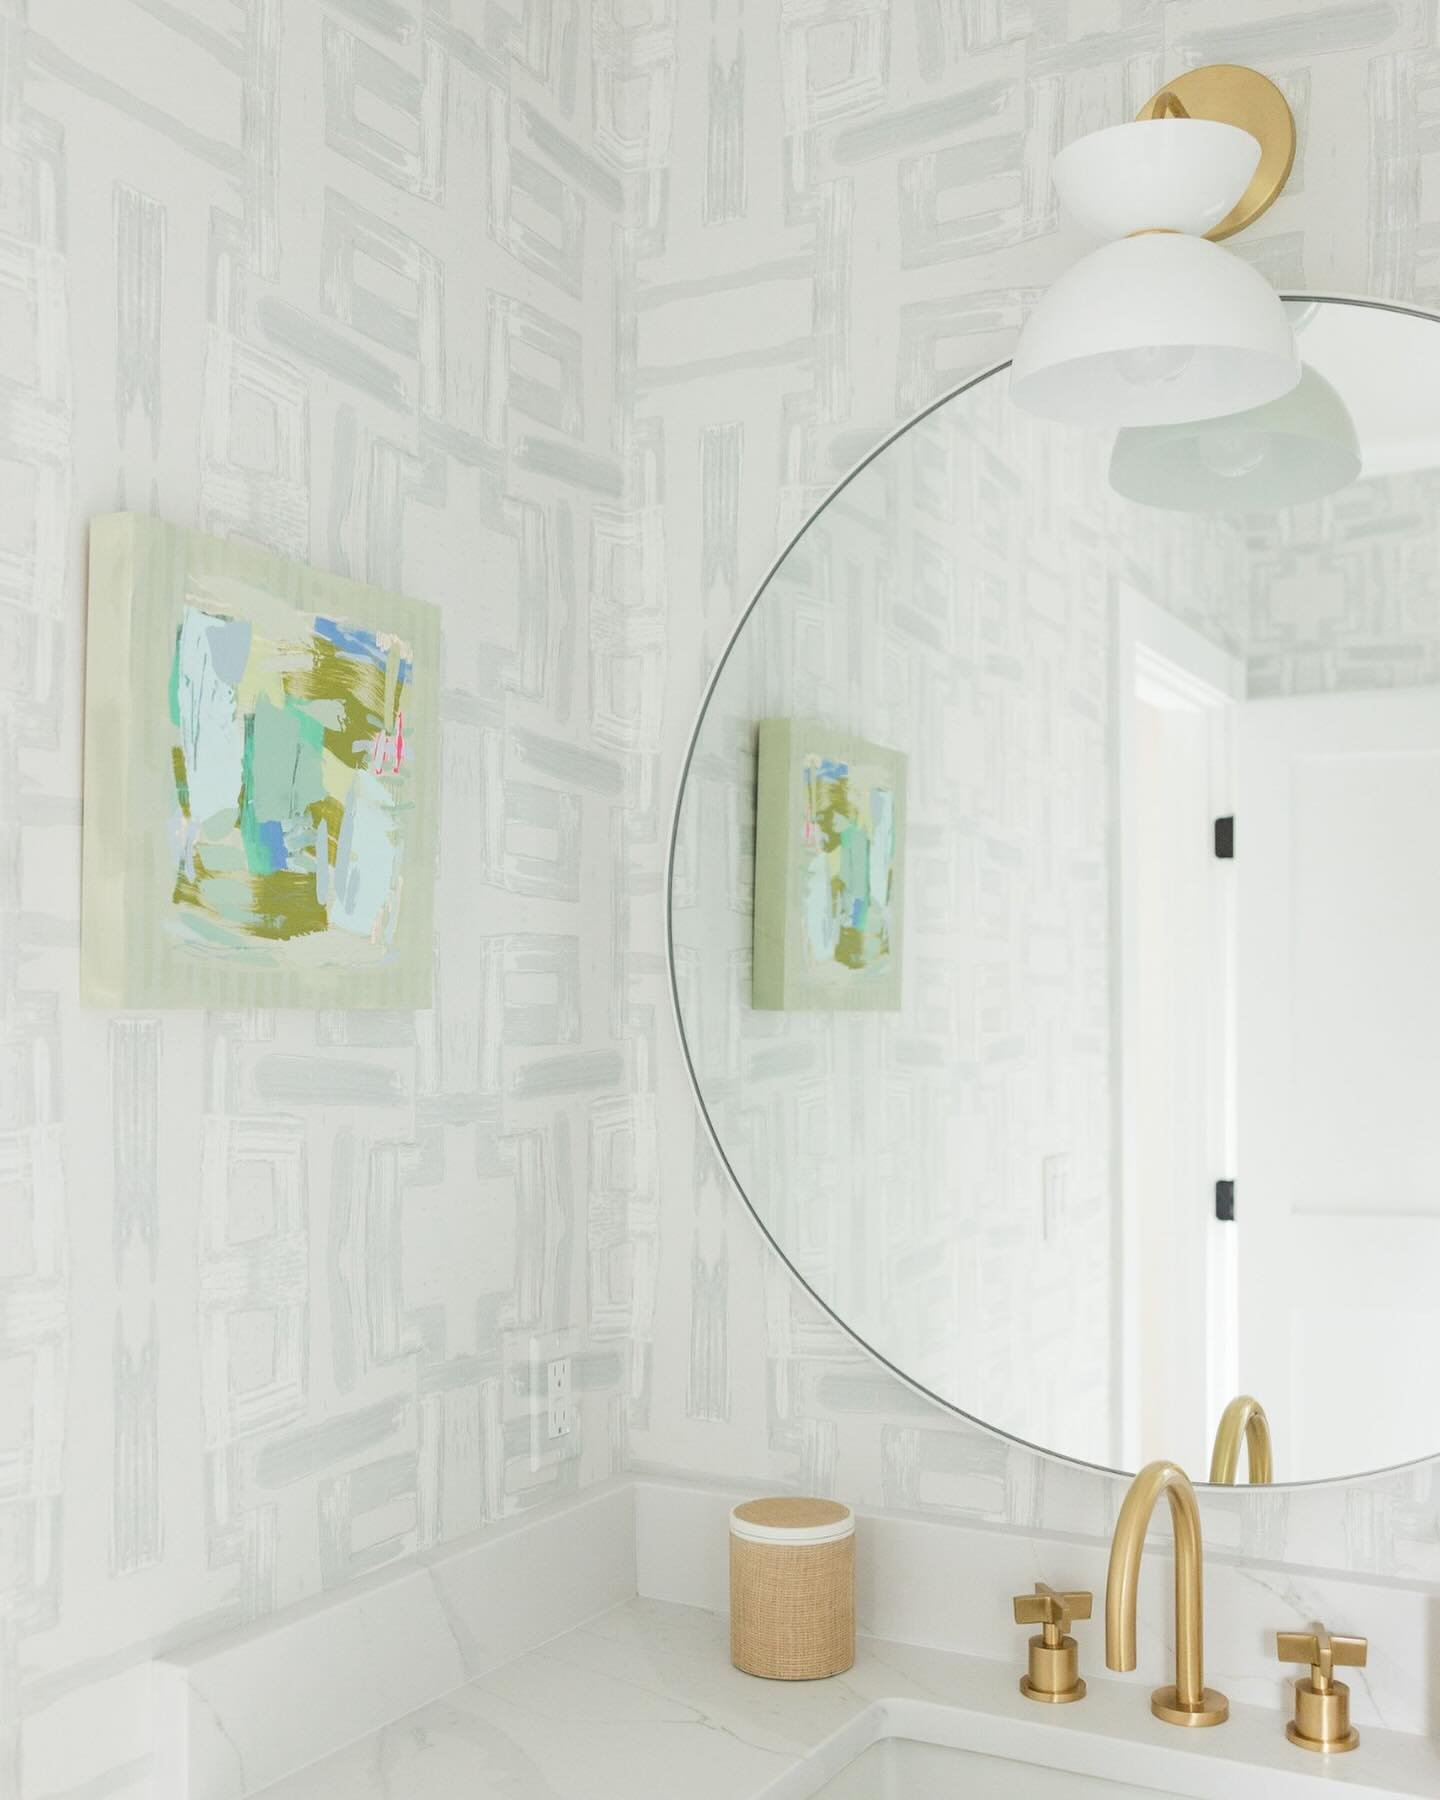 An example of art + wallpaper pairing together beautifully, courtesy of the brilliant @samanthaspappas and this @lucyreiser painting she selected for another darling bathroom she&rsquo;s designed. Photo by the talented @courtney_elizabeth_media.